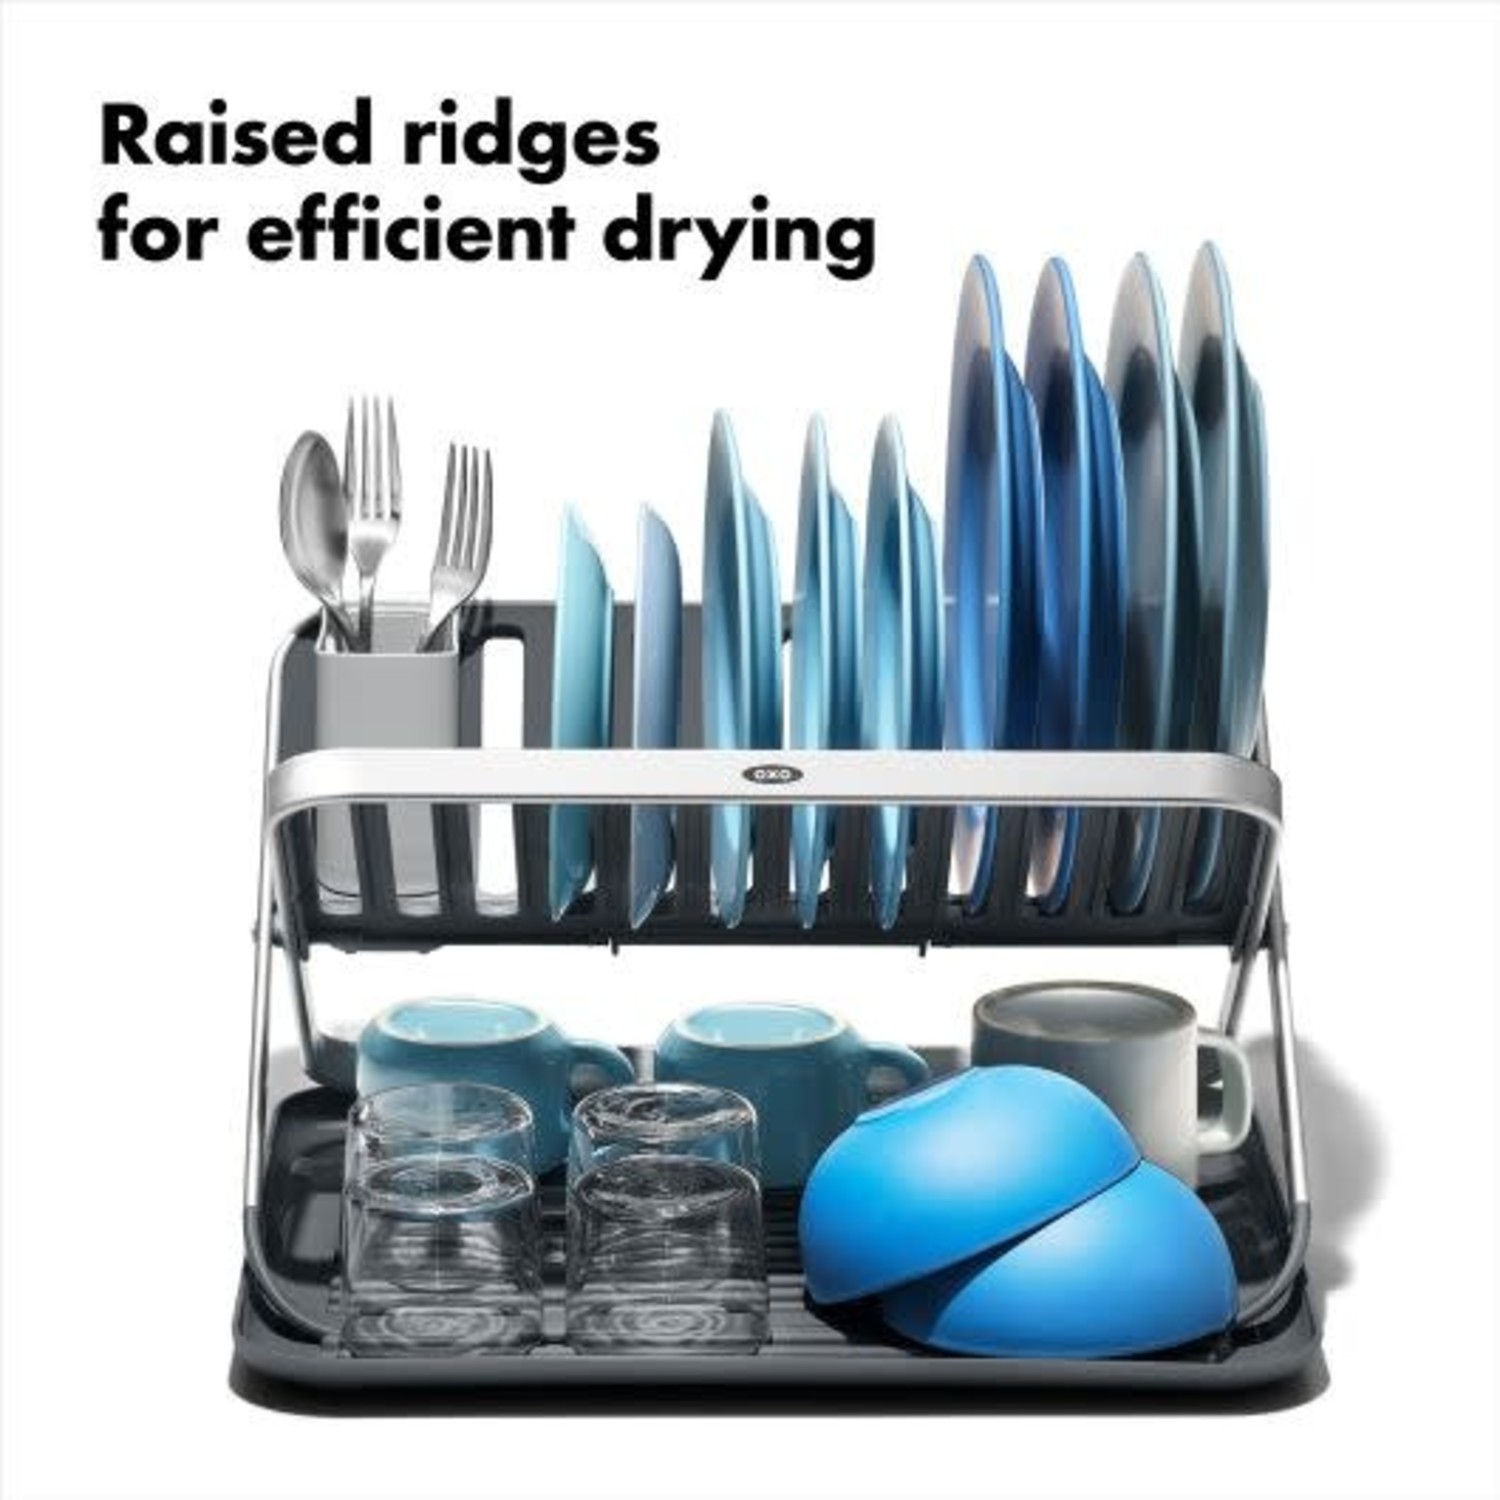 OXO Over-the-Sink Dish Rack + Reviews